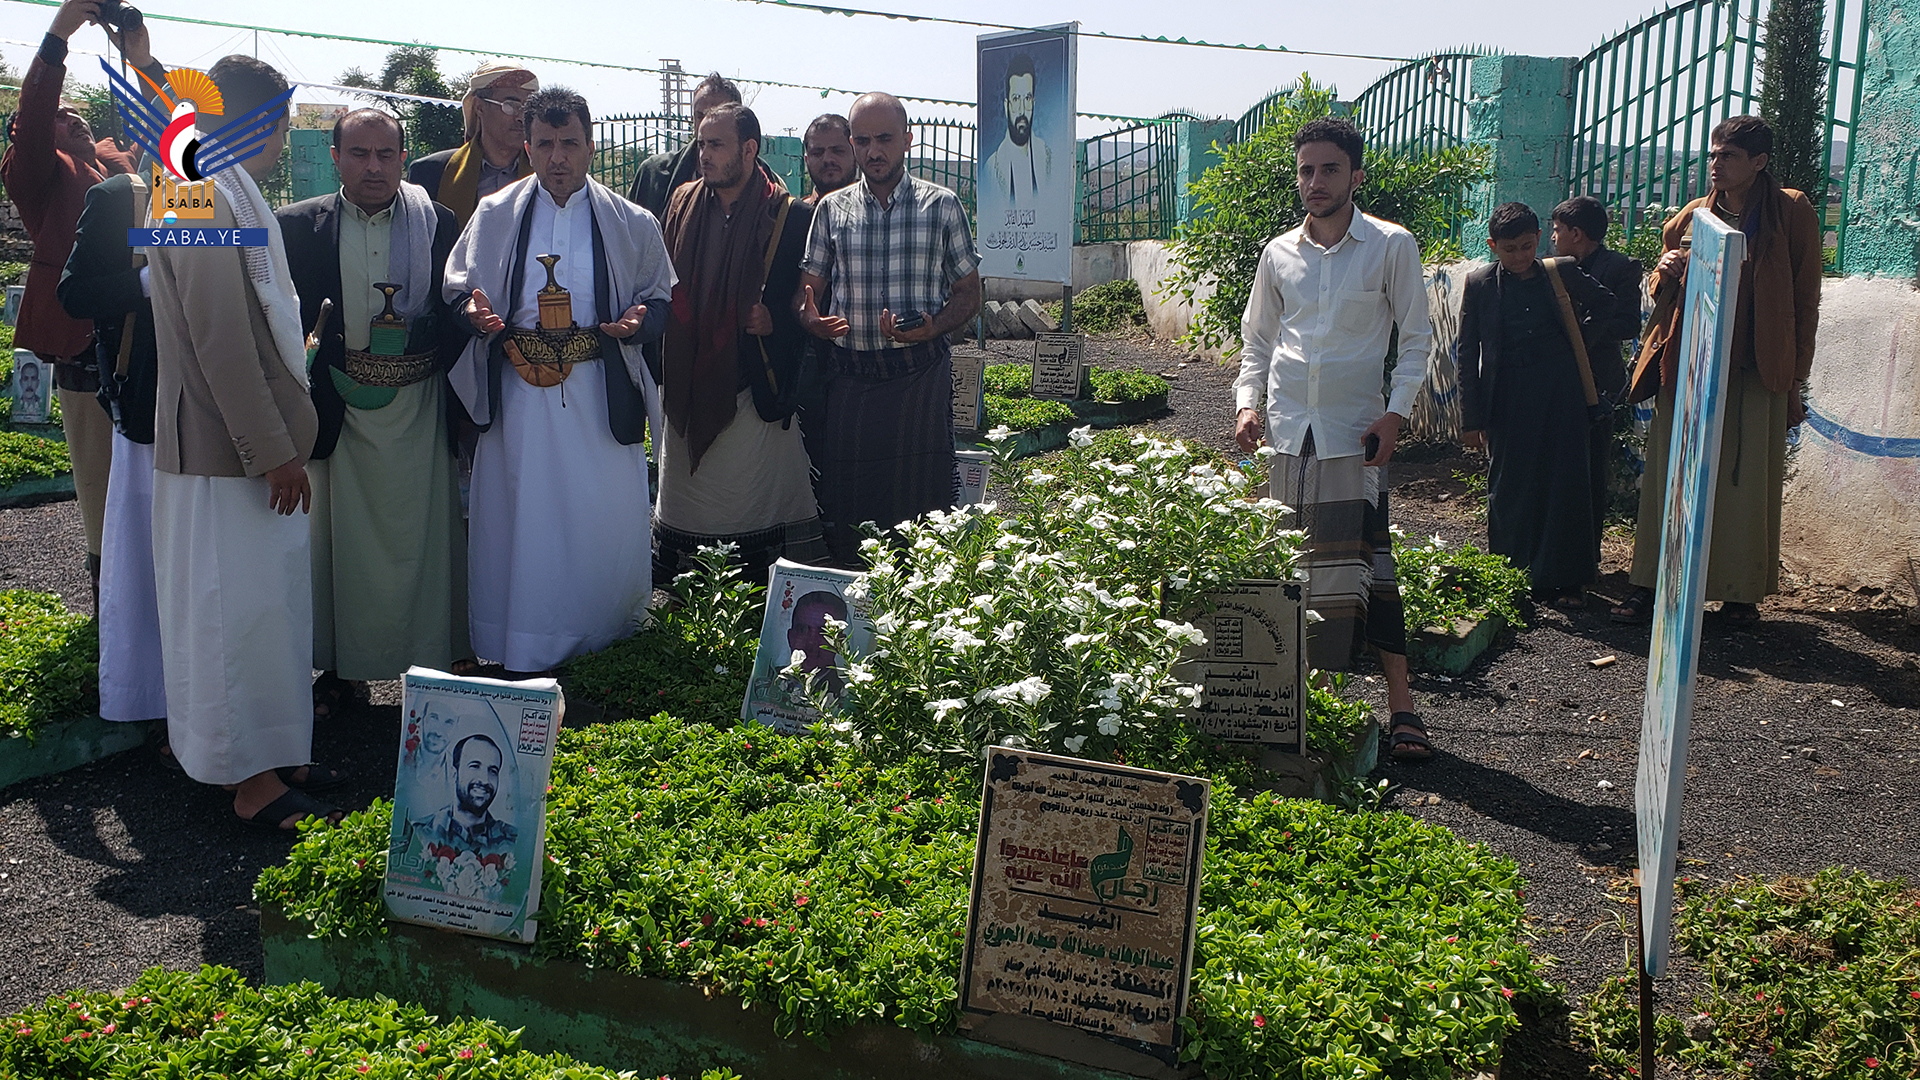 Health Minister visits Martyr cemetery in Taiz